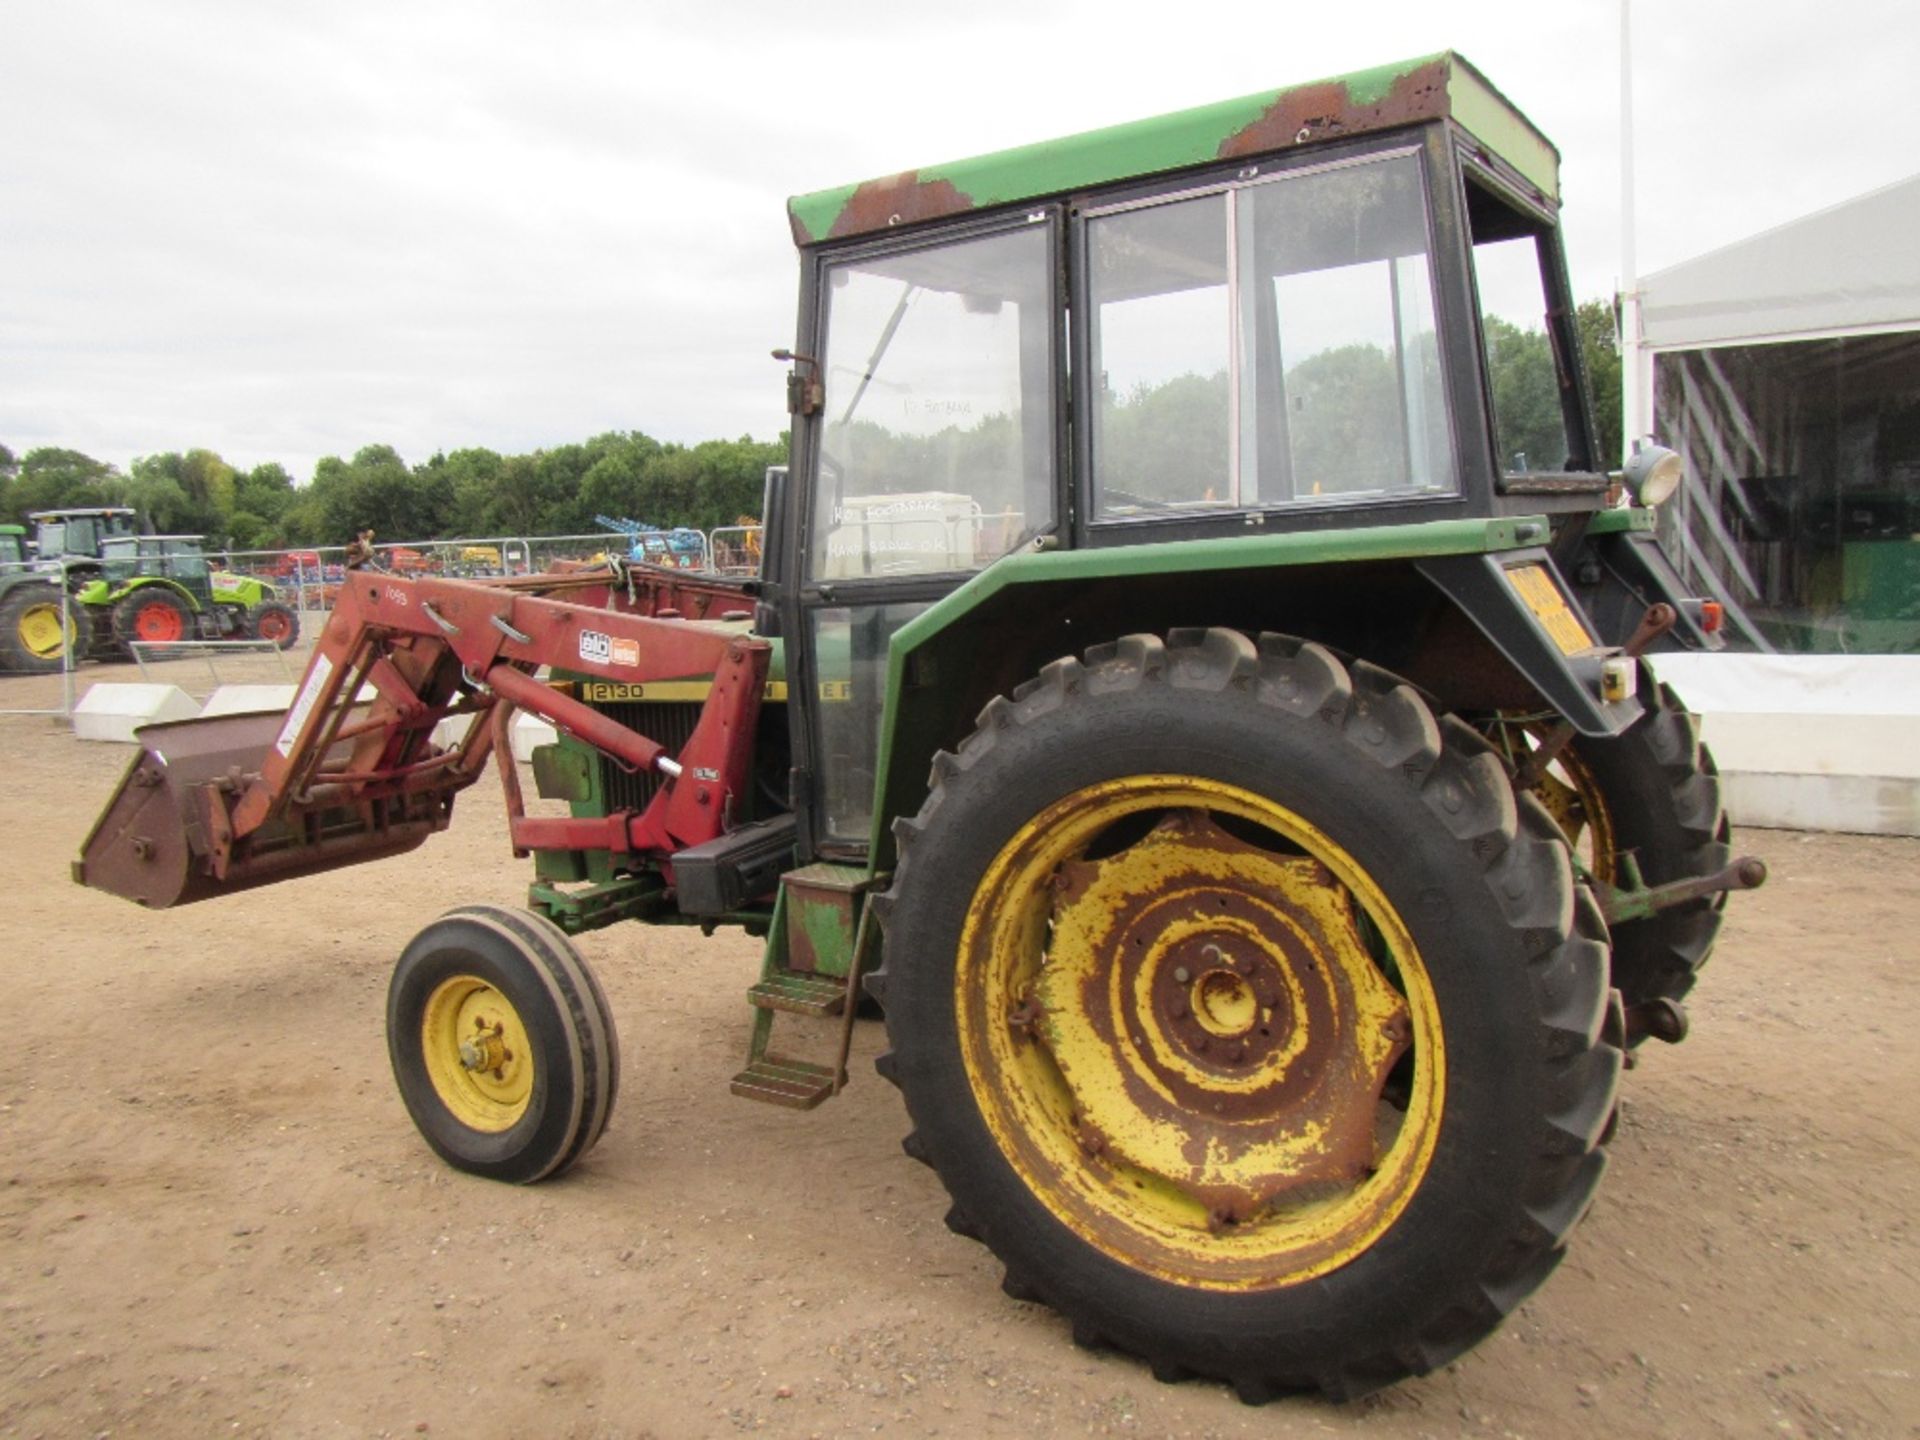 John Deere 3040 4wd Tractor. Subject to TOTAL LOSS INSURANCE CLAIM Reg. No. A122 VFE - Image 9 of 12